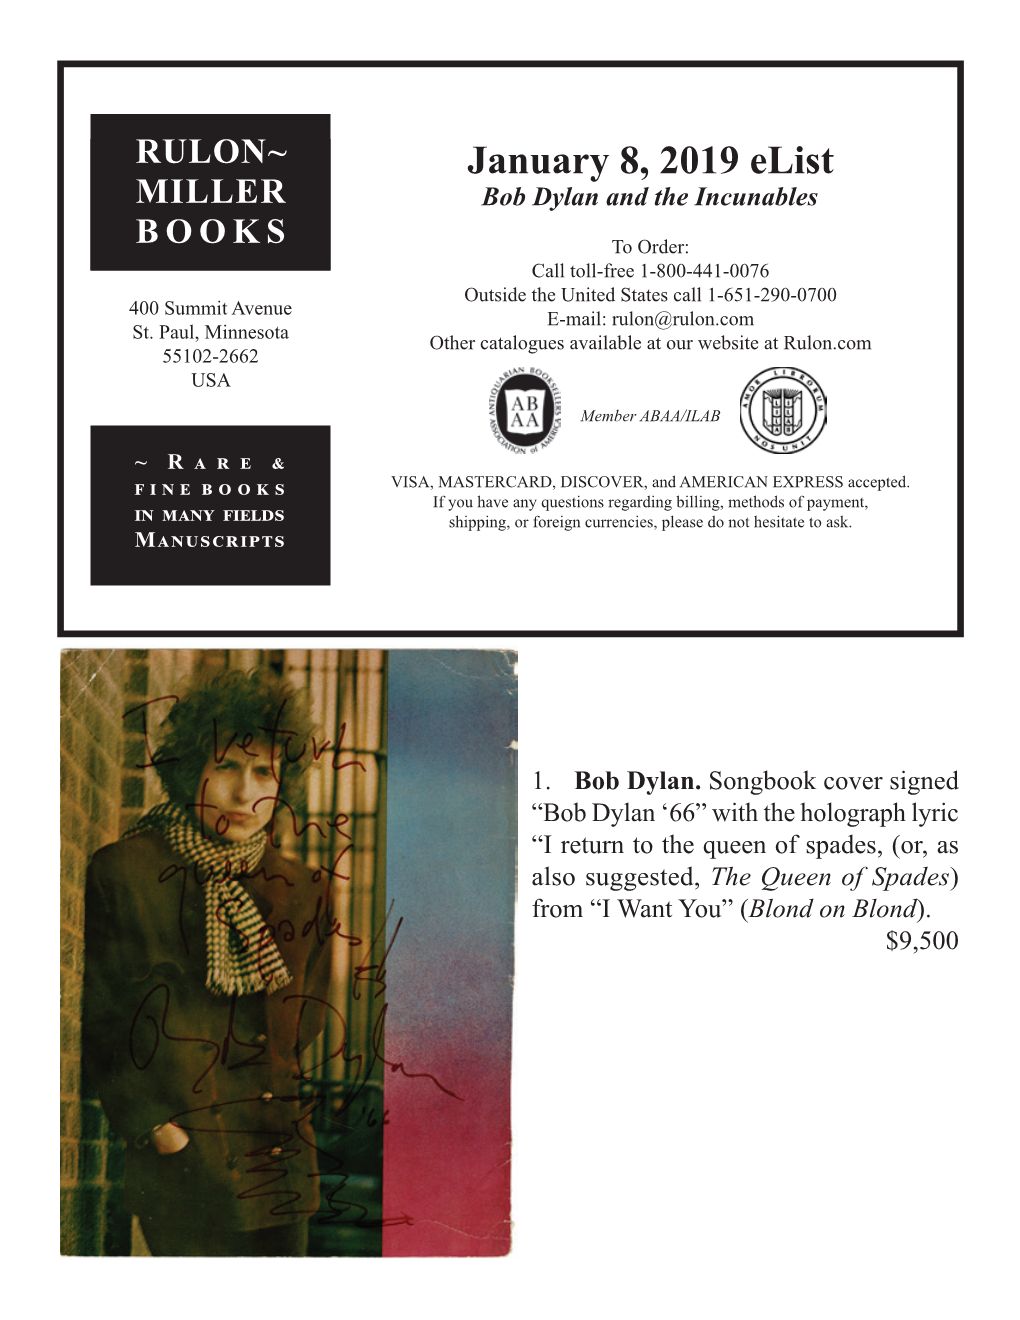 January 8, 2019 Elist MILLER Bob Dylan and the Incunables